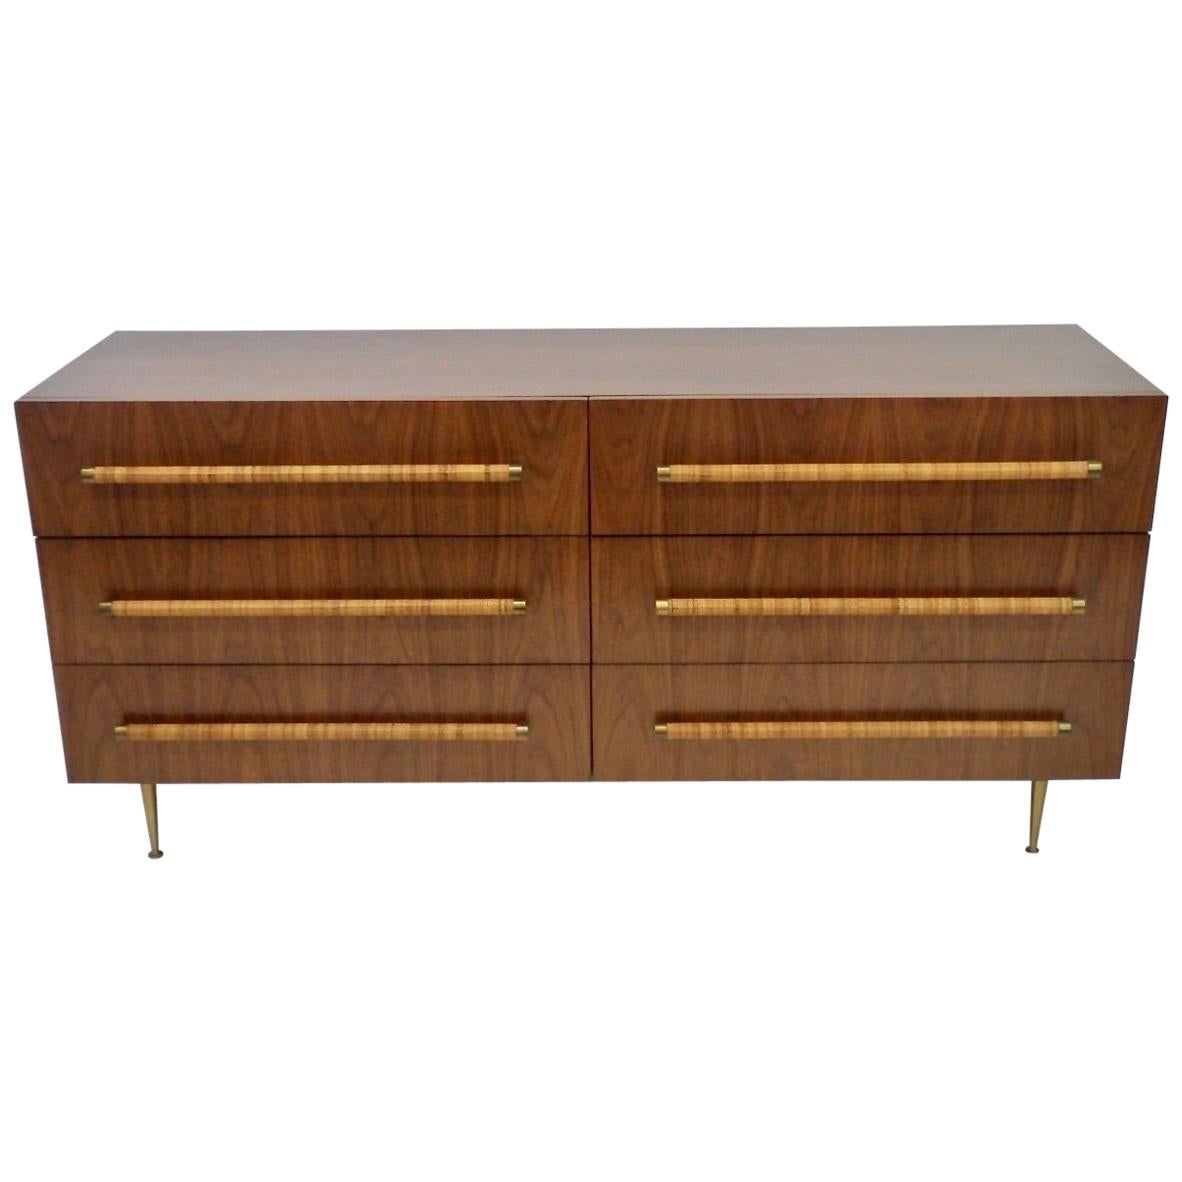 TH Robsjohn Gibbings Double Dresser with Raffia Wrapped Pulls and Brass Legs